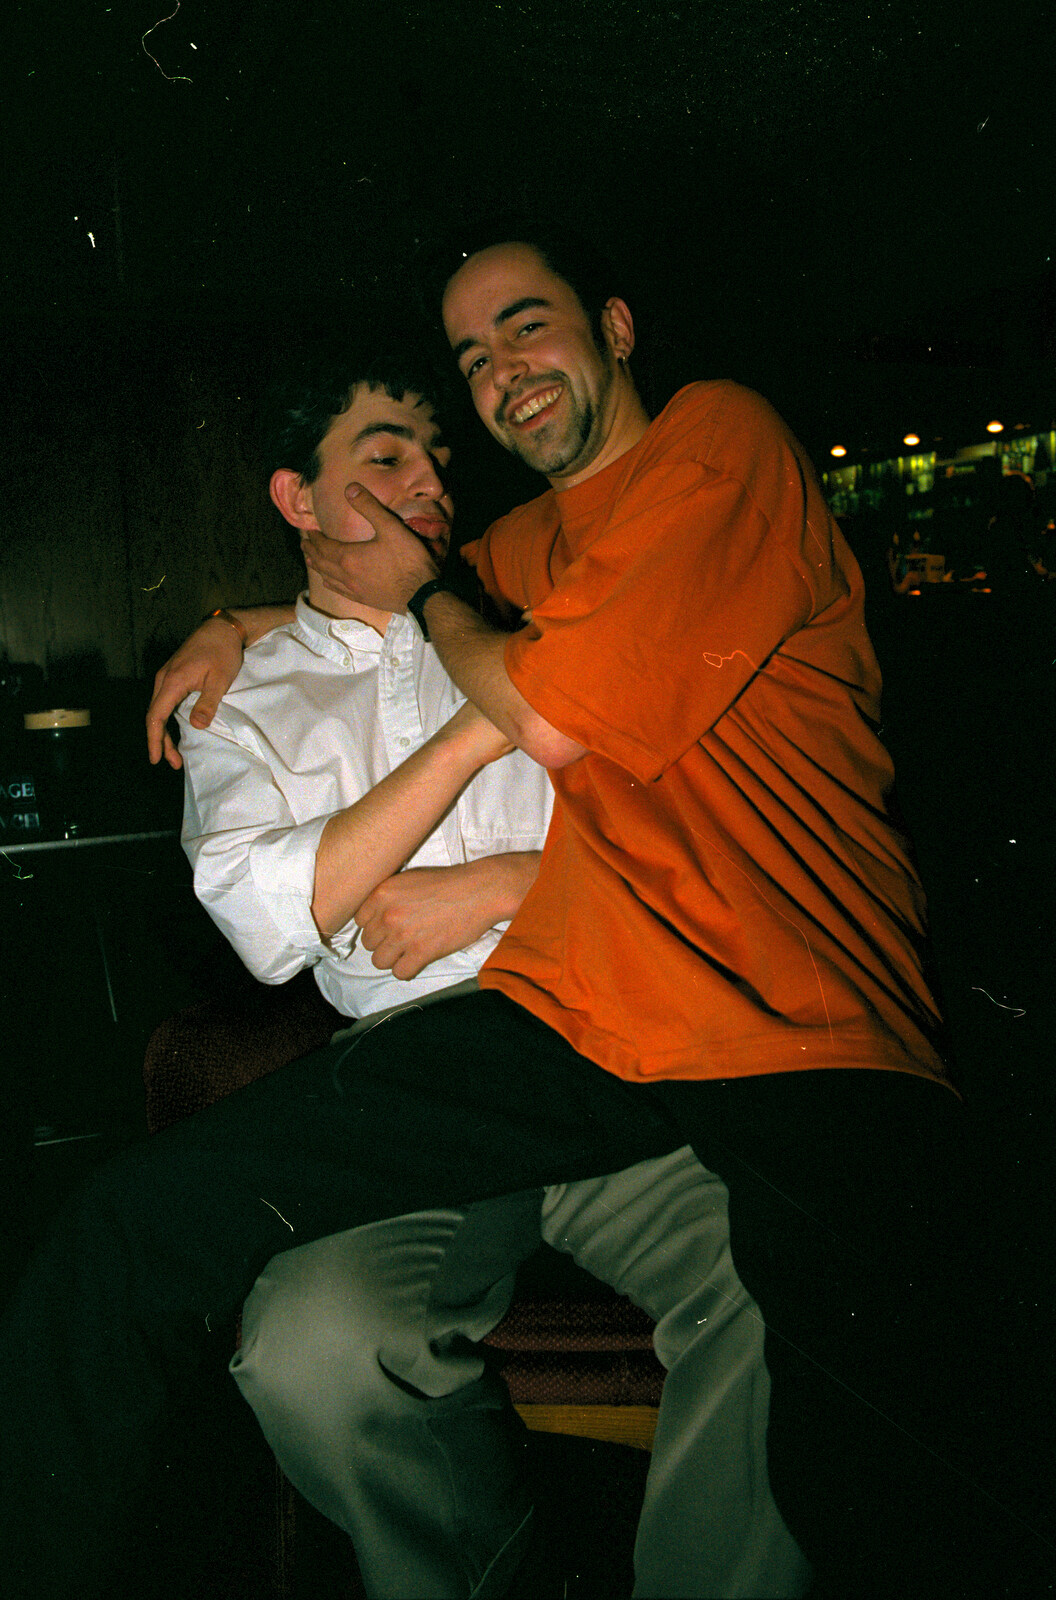 CISU Plays Cardinal's Hat in the SCC Social Club, Ipswich, Suffolk - 3rd August 1997: Trev gives Neil a pat on the cheek